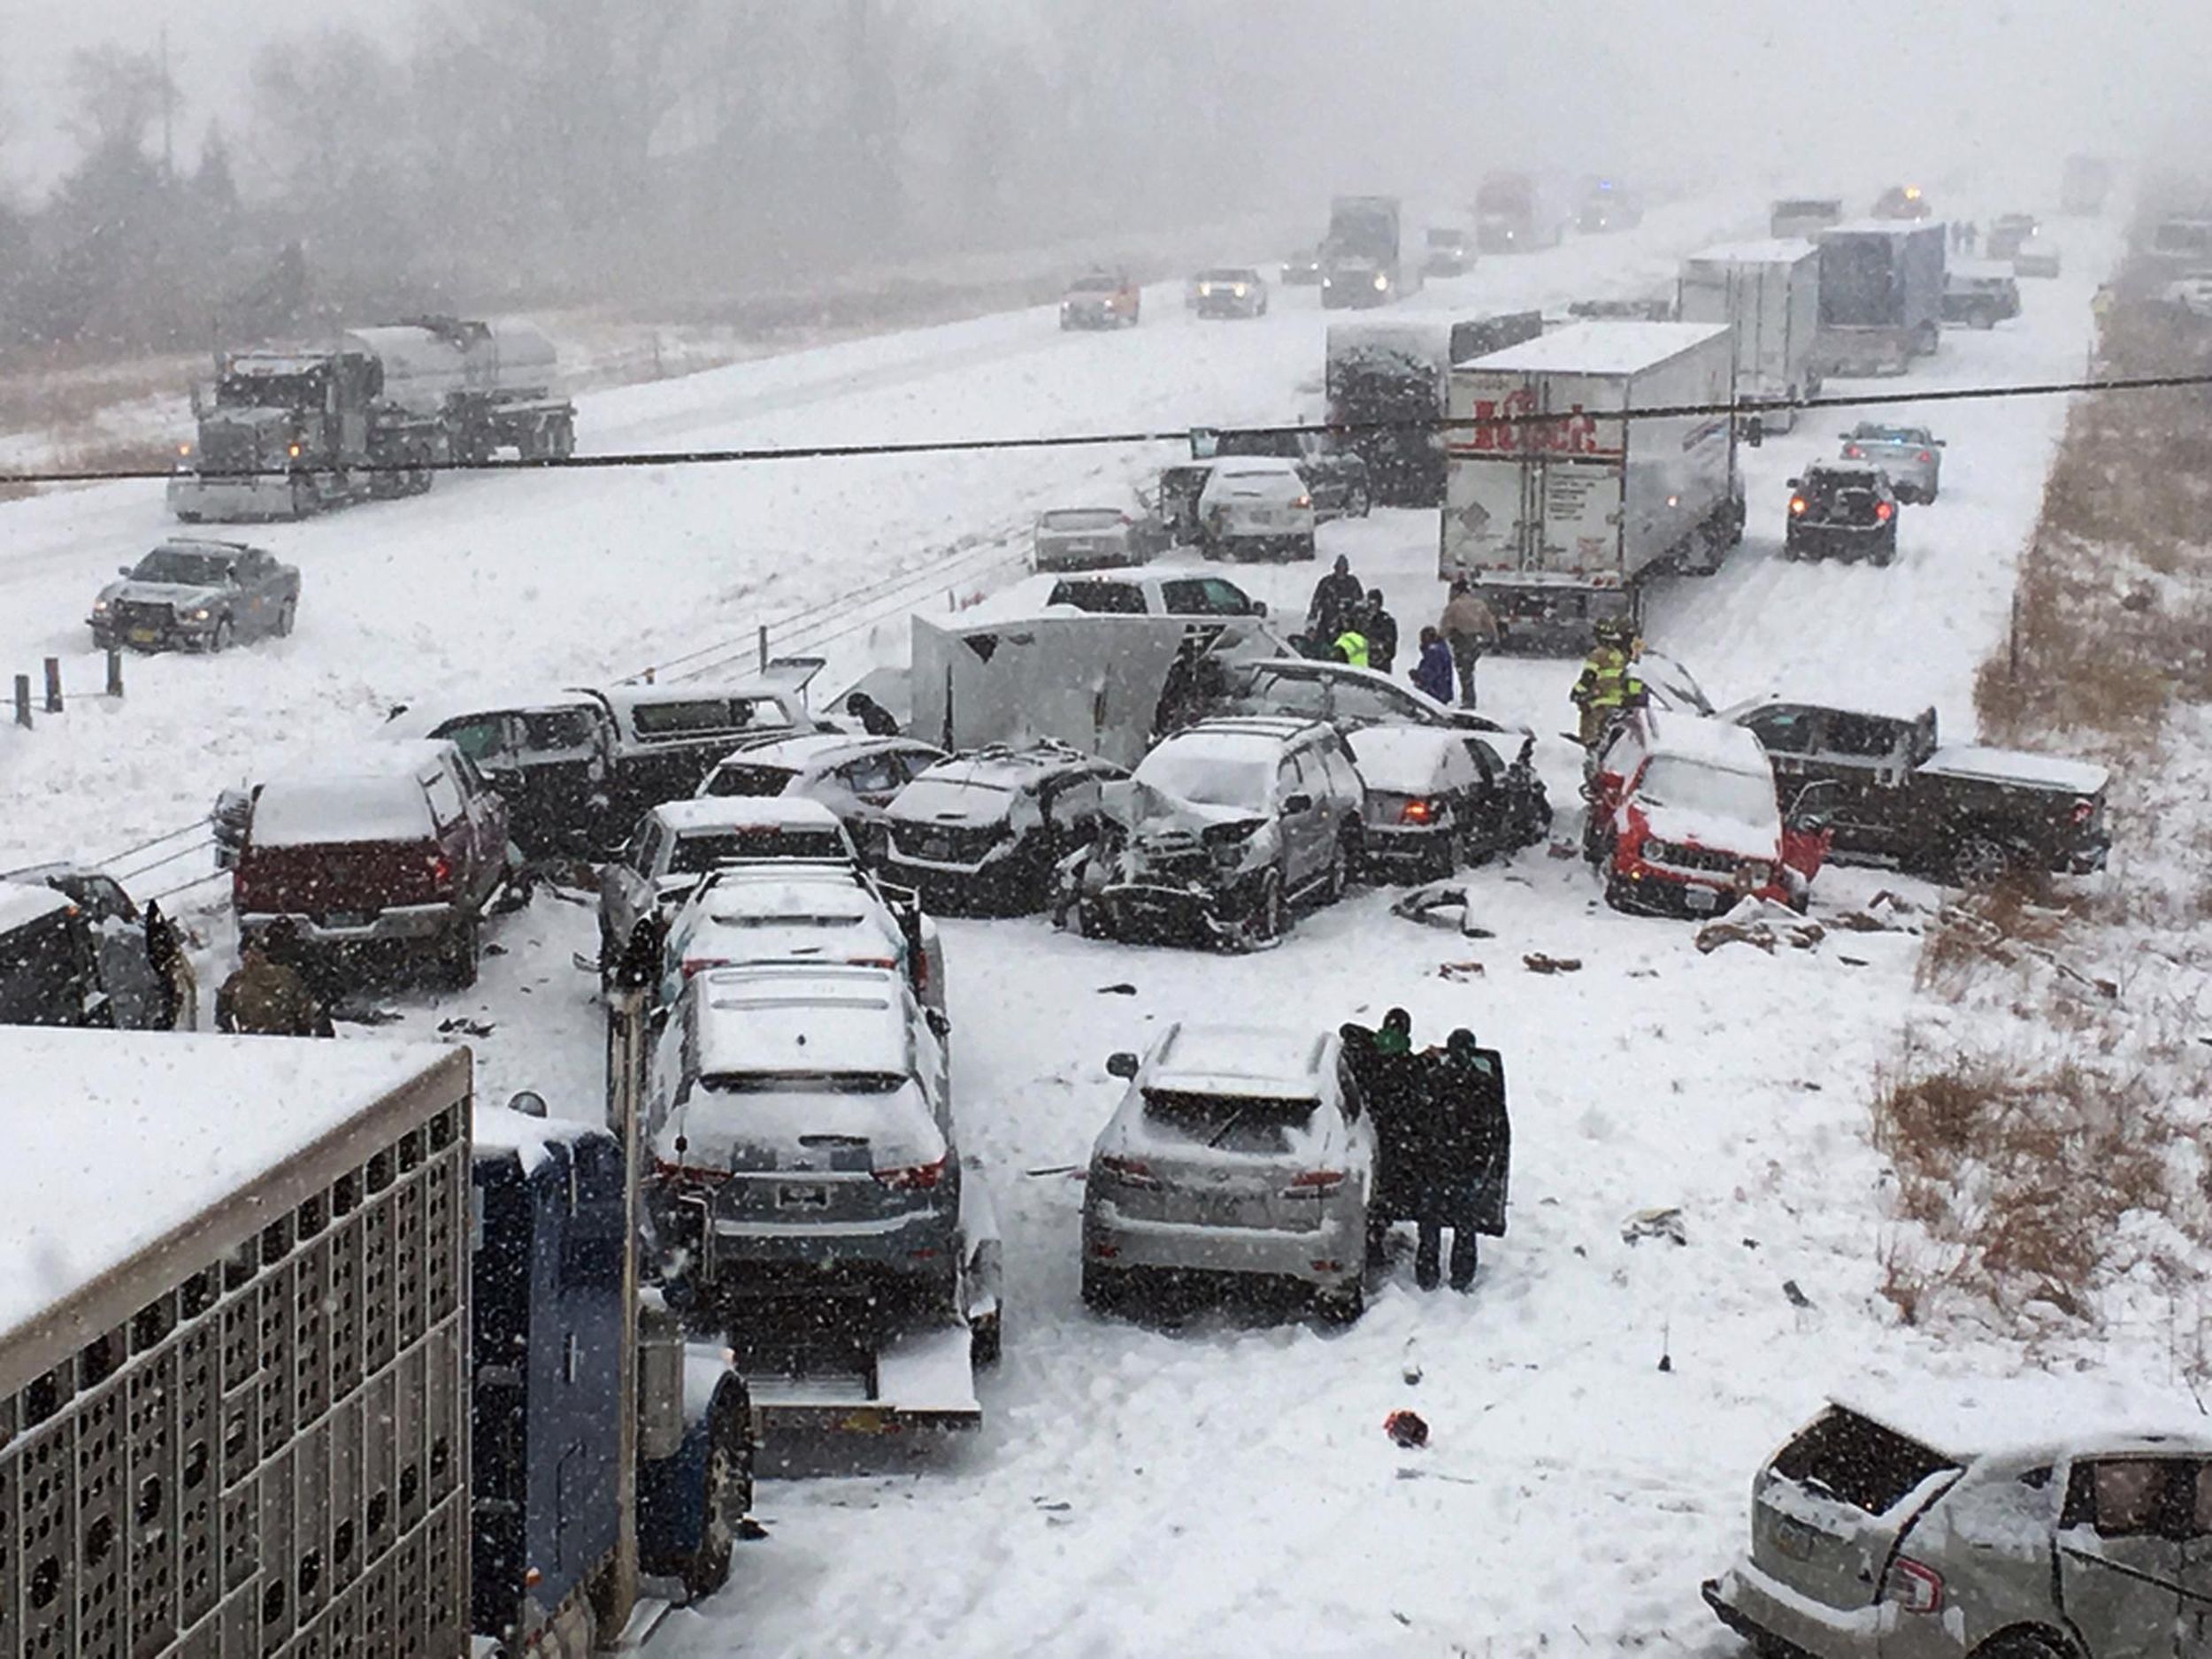 Snow Causes Hundreds Of Crashes 5 Killed On Missouri Roads The Spokesman Review